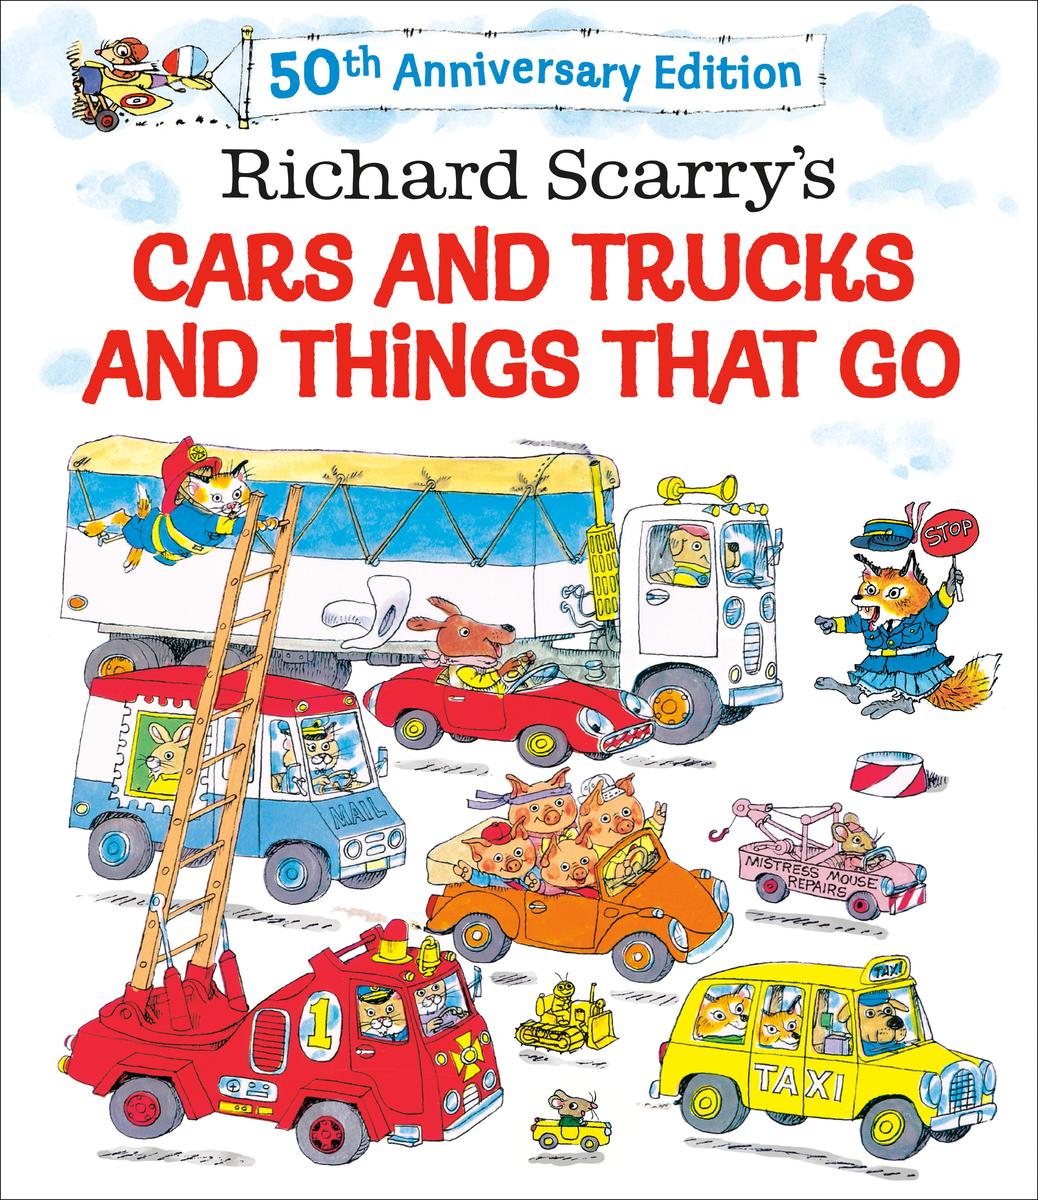 Richard Scarry's Cars and Trucks and Things That Go - 50th Anniversary Edition